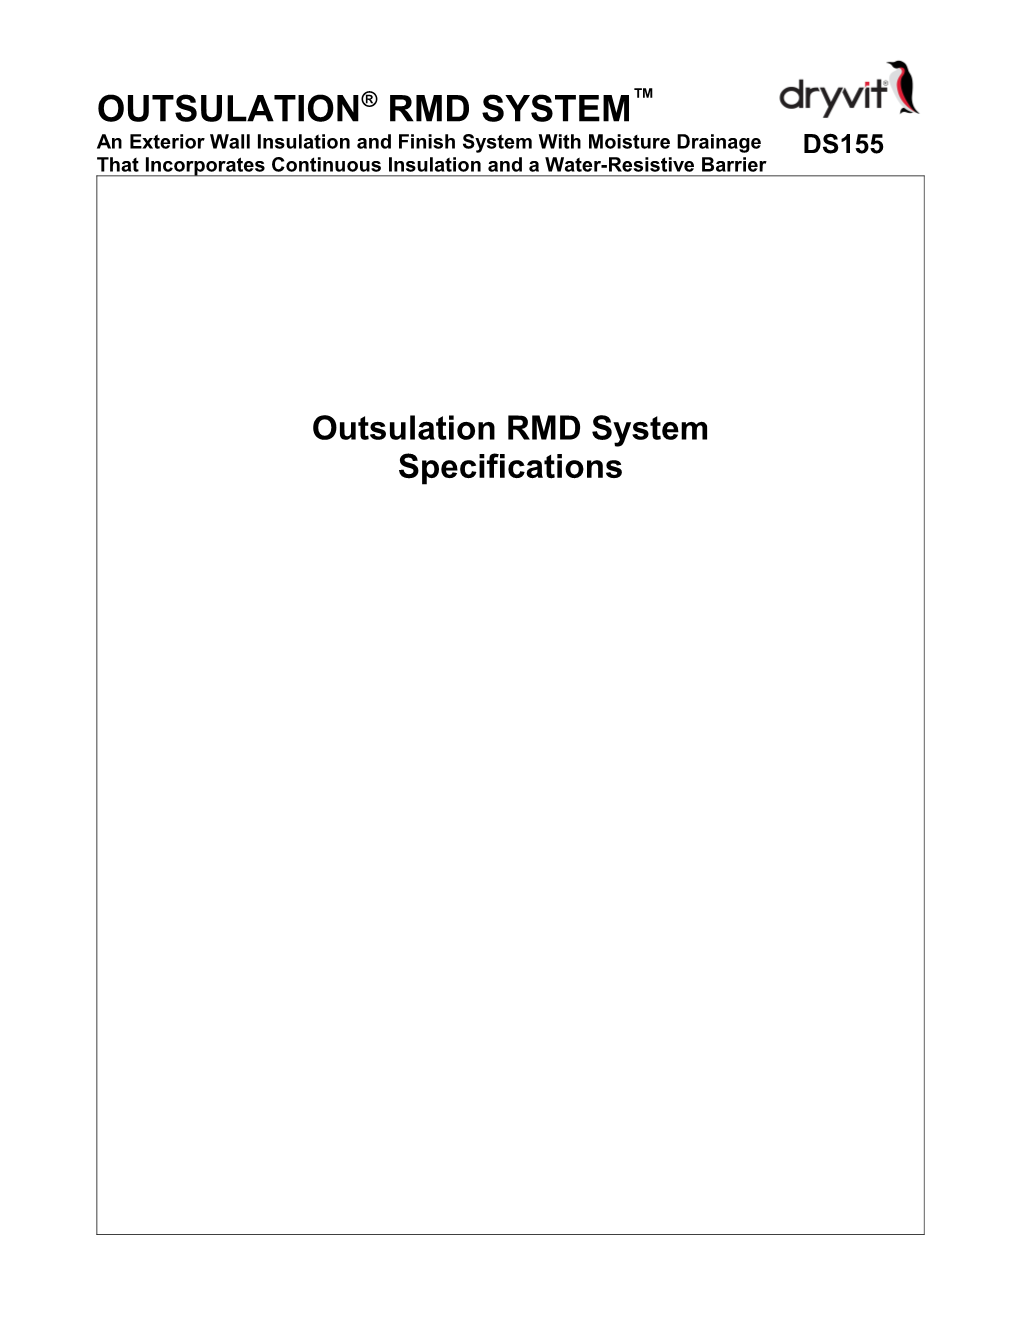 Outsulation RMD System - DS155